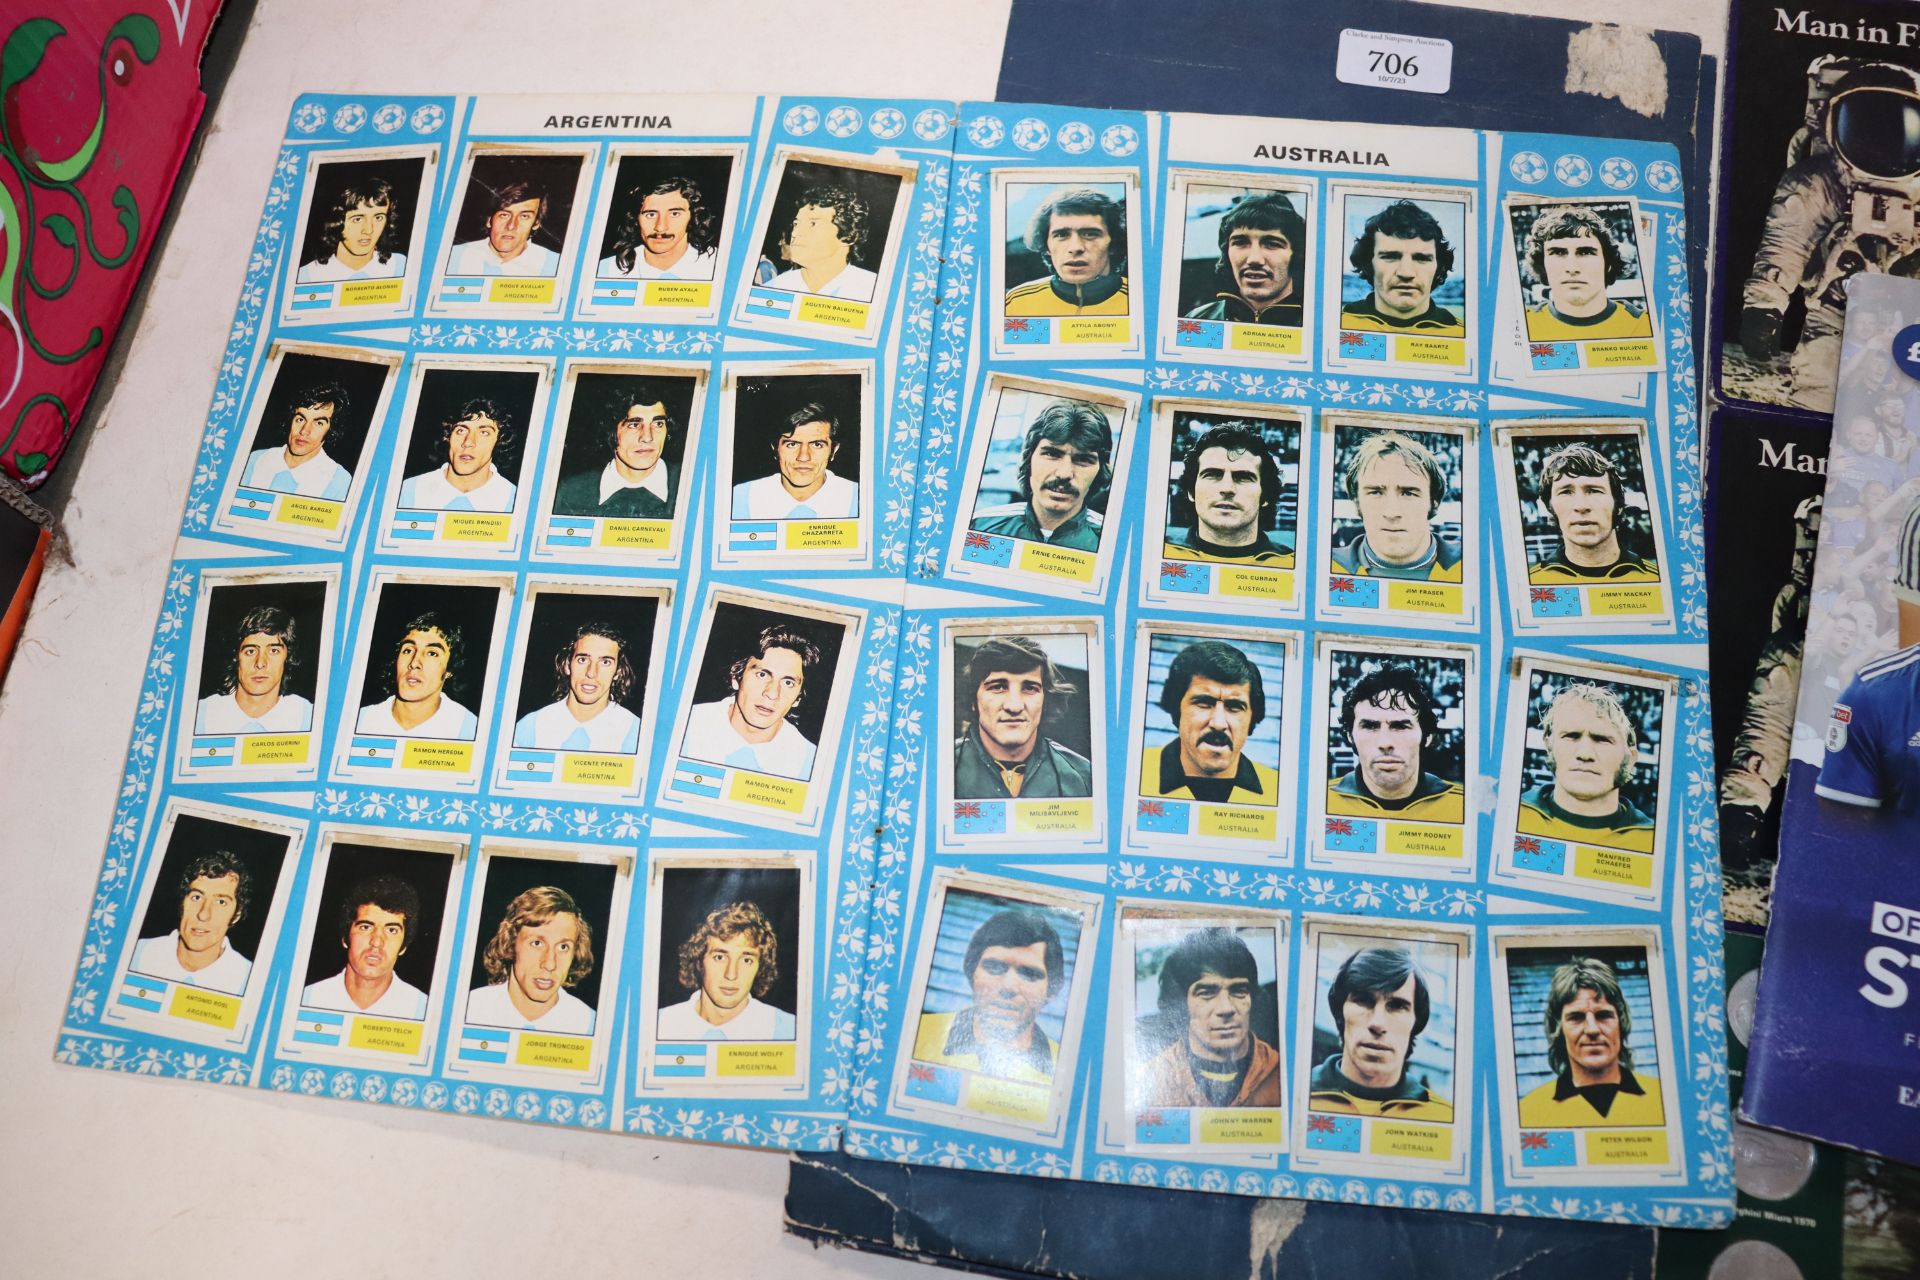 A quantity of collectors coins, Ipswich Town sticker album, World Cup 1974 soccer stars album etc - Image 6 of 12